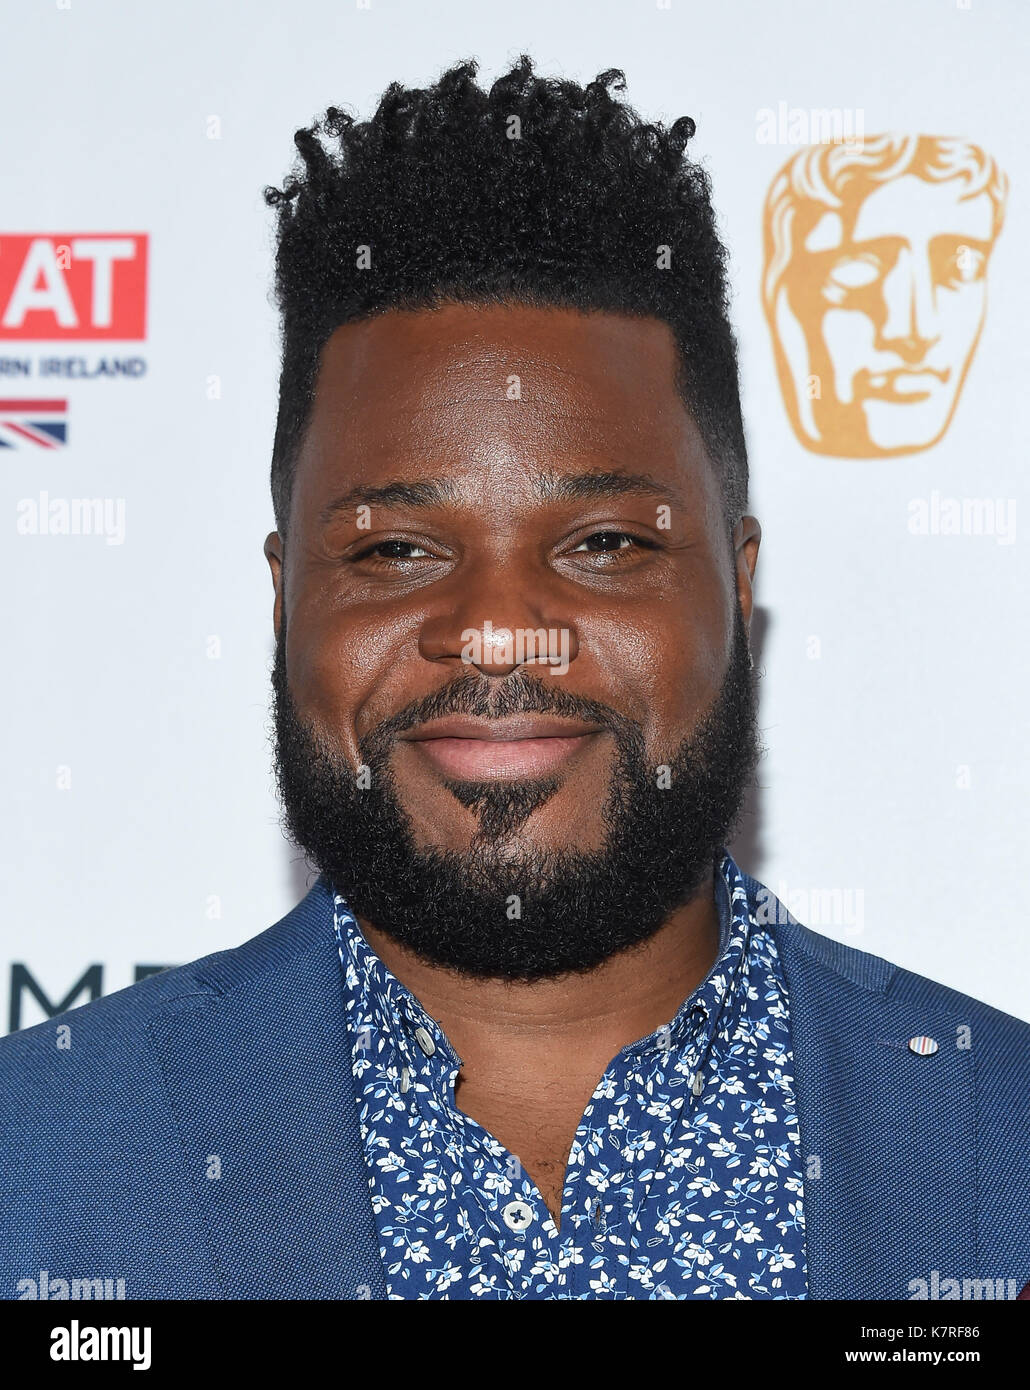 Beverly Hills, California, USA. 16th Sep, 2017. Malcolm-Jamal Warner arrives for the BAFTA TV Tea Party 2017 at the Beverly Hilton Hotel. Credit: Lisa O'Connor/ZUMA Wire/Alamy Live News Stock Photo